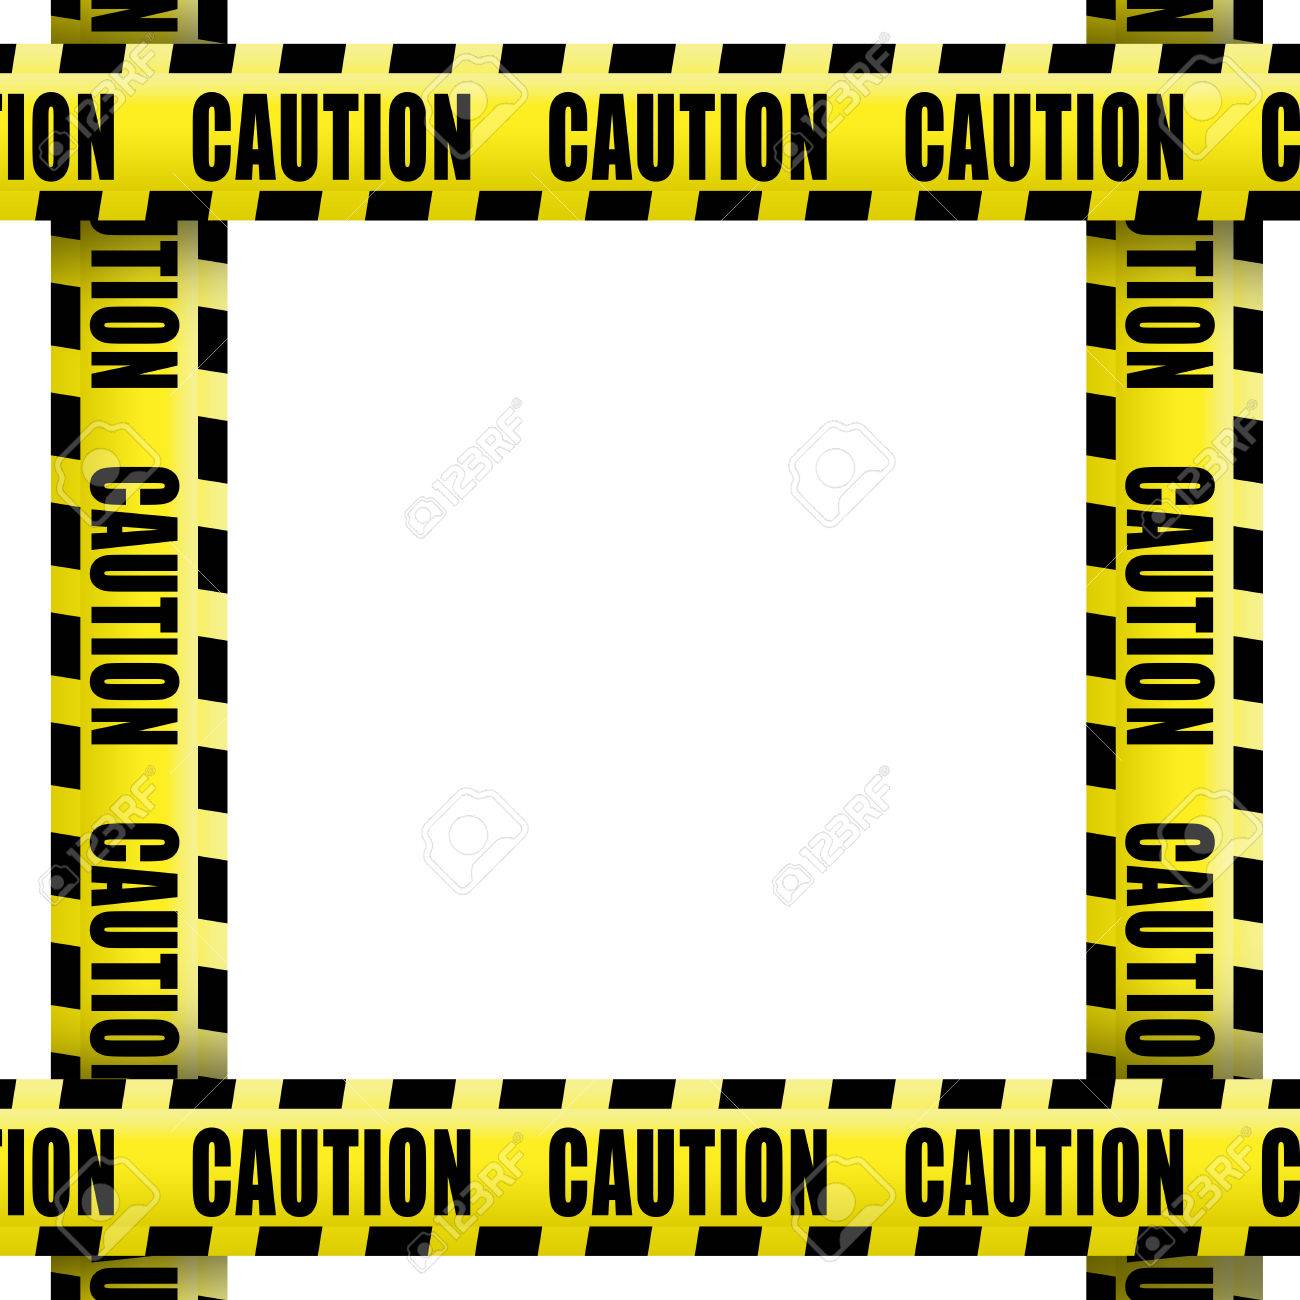 Caution Tape On White Background Stock Photo Picture And Royalty